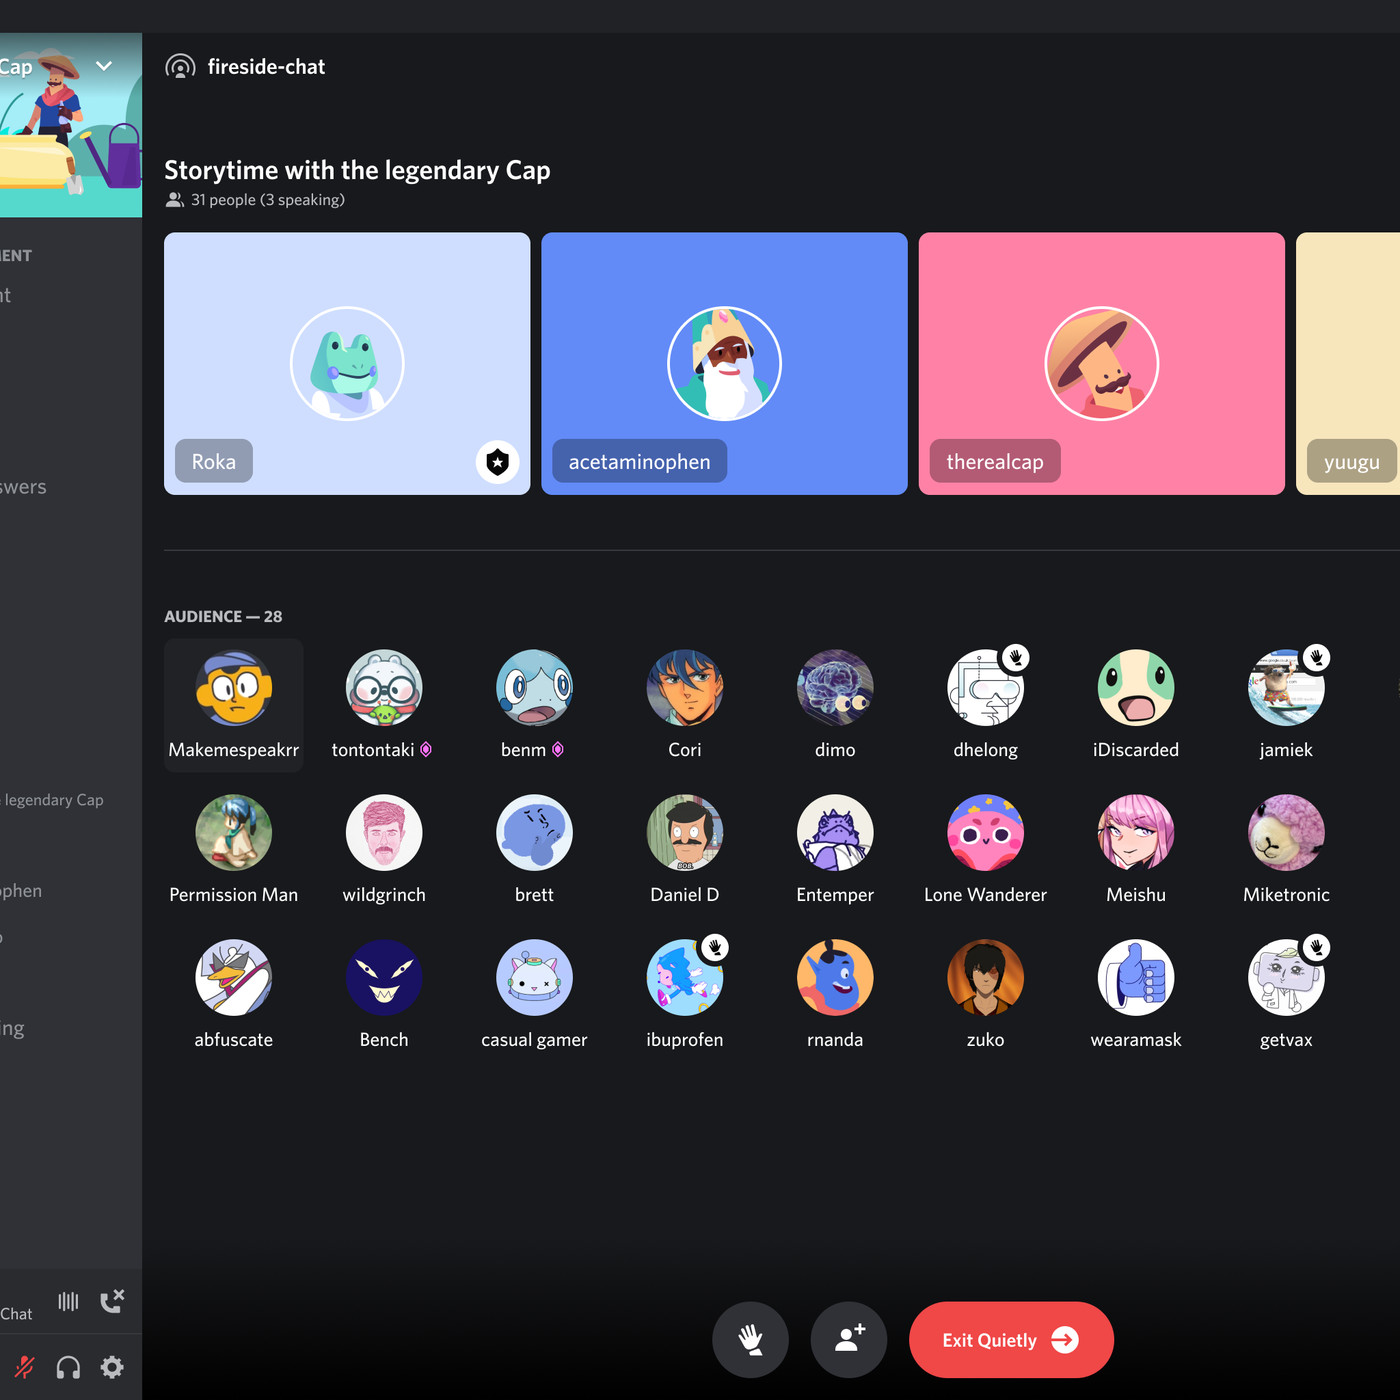 How to build a Discord community for your brand